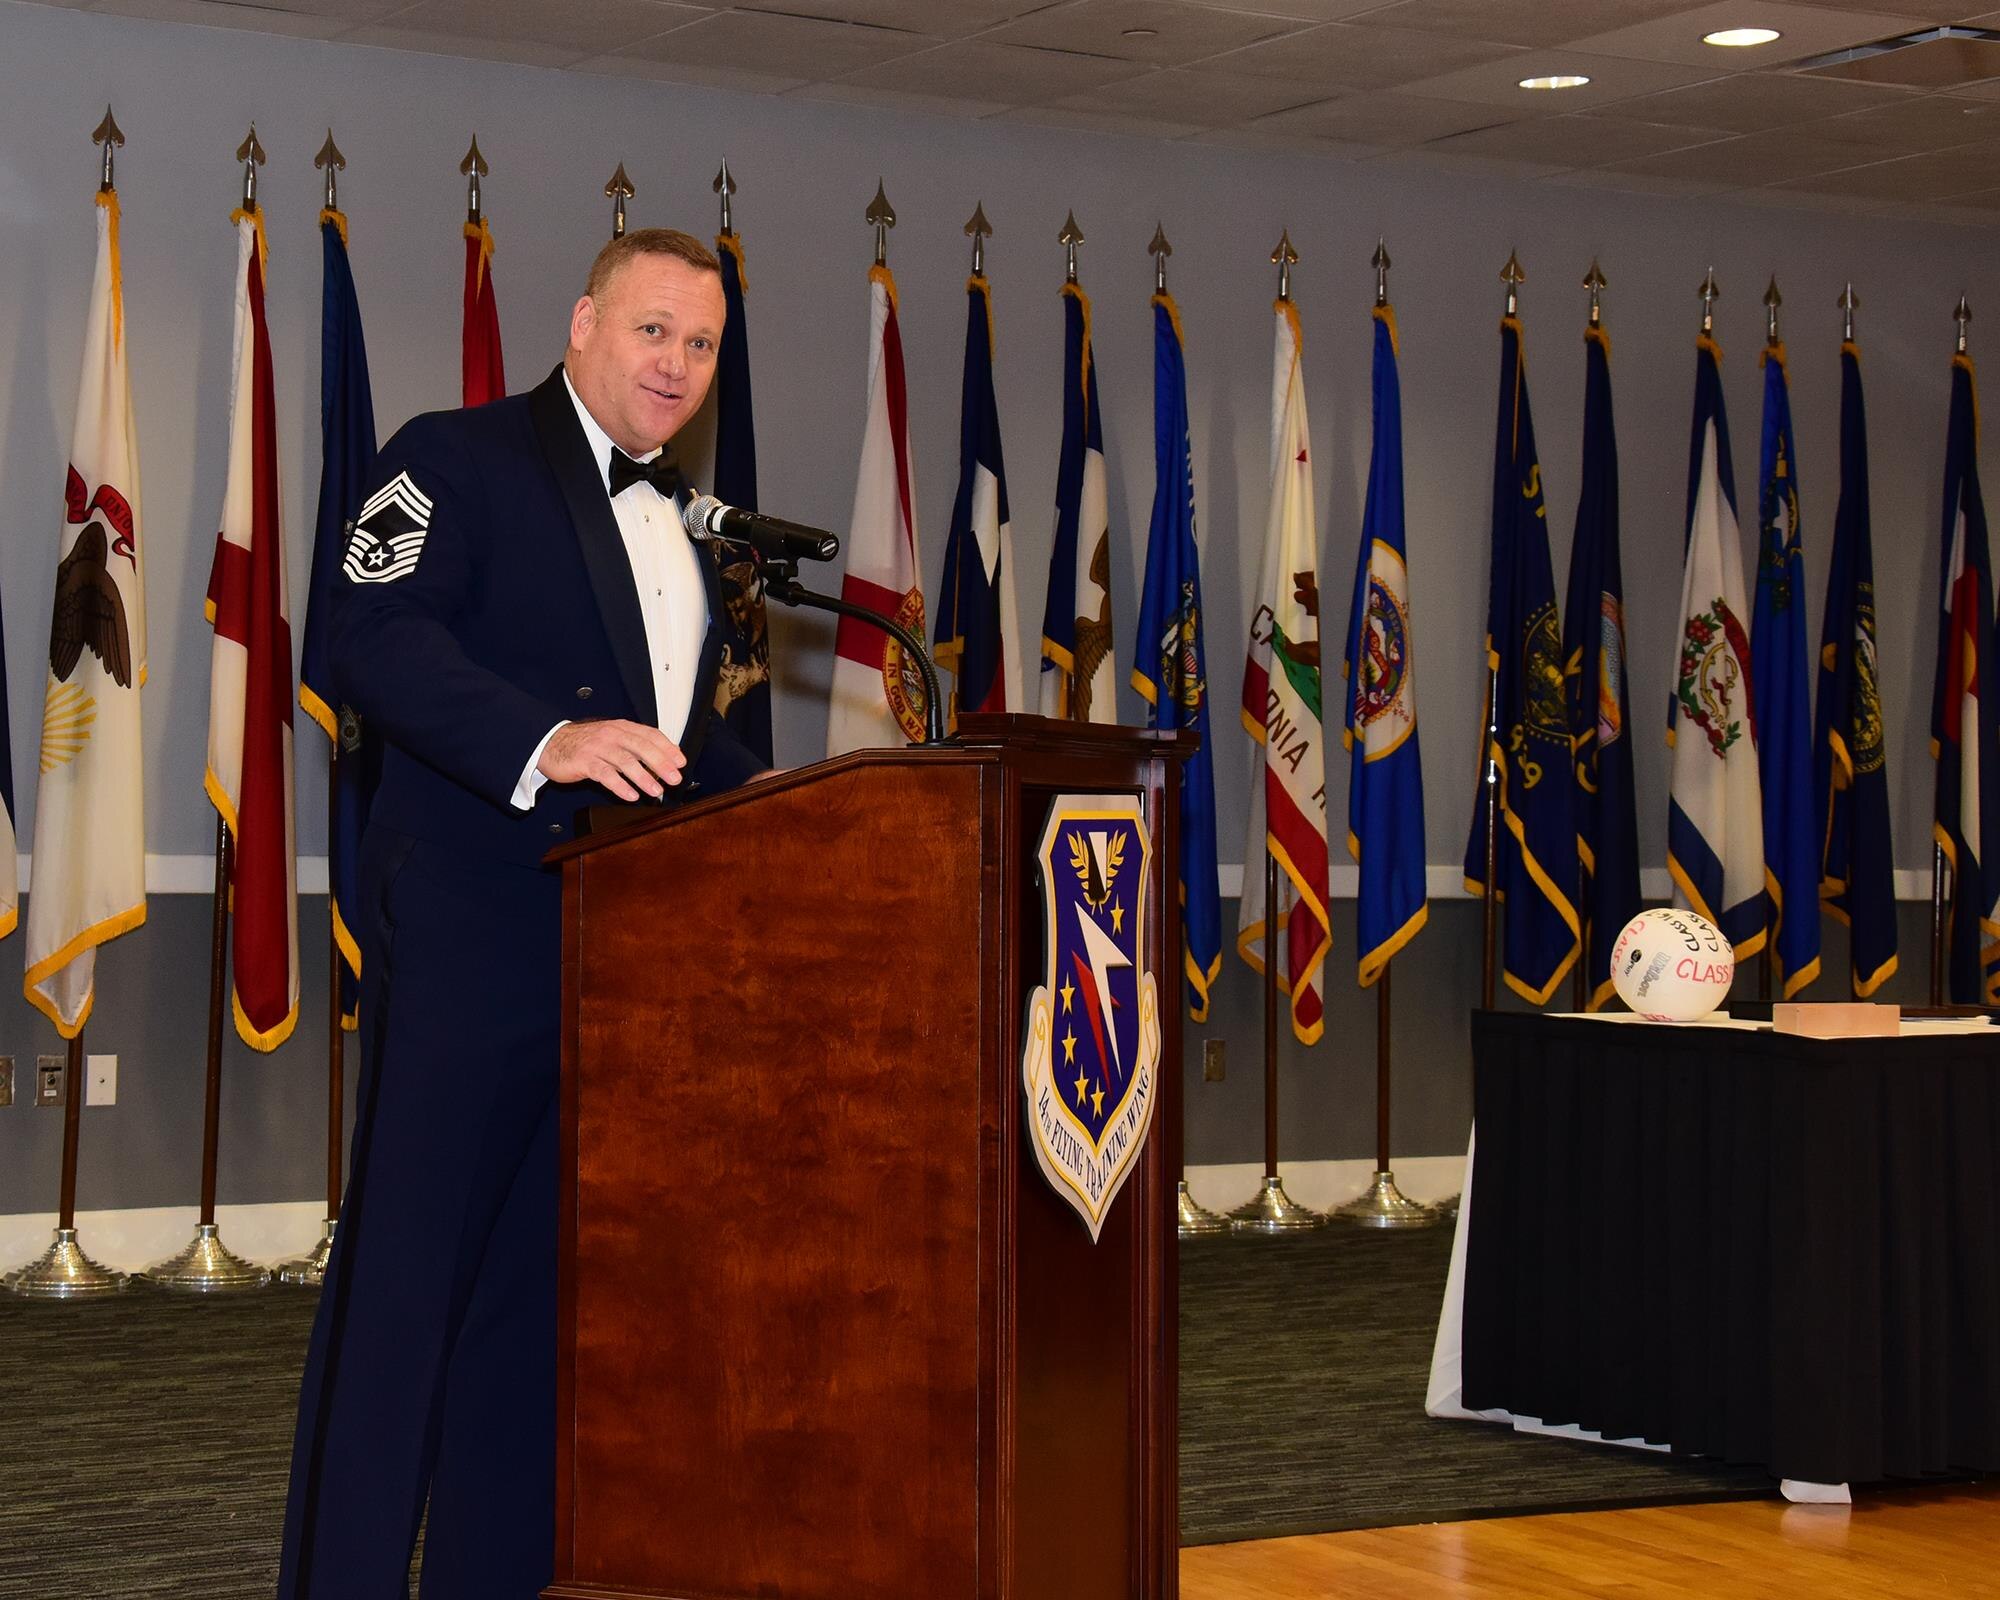 Chief Master Sgt. Brad Reilly, 14th Operations Group Superintendent, speaks at the Airman Leadership School Class 17-6 graduation Aug. 24, 2017, at the Columbus Club on Columbus Air Force Base, Mississippi. Reilly, the guest speaker, likened the process of sword-making into building a great Airman during his speech. (U.S. Air Force photo by Elizabeth Owens)